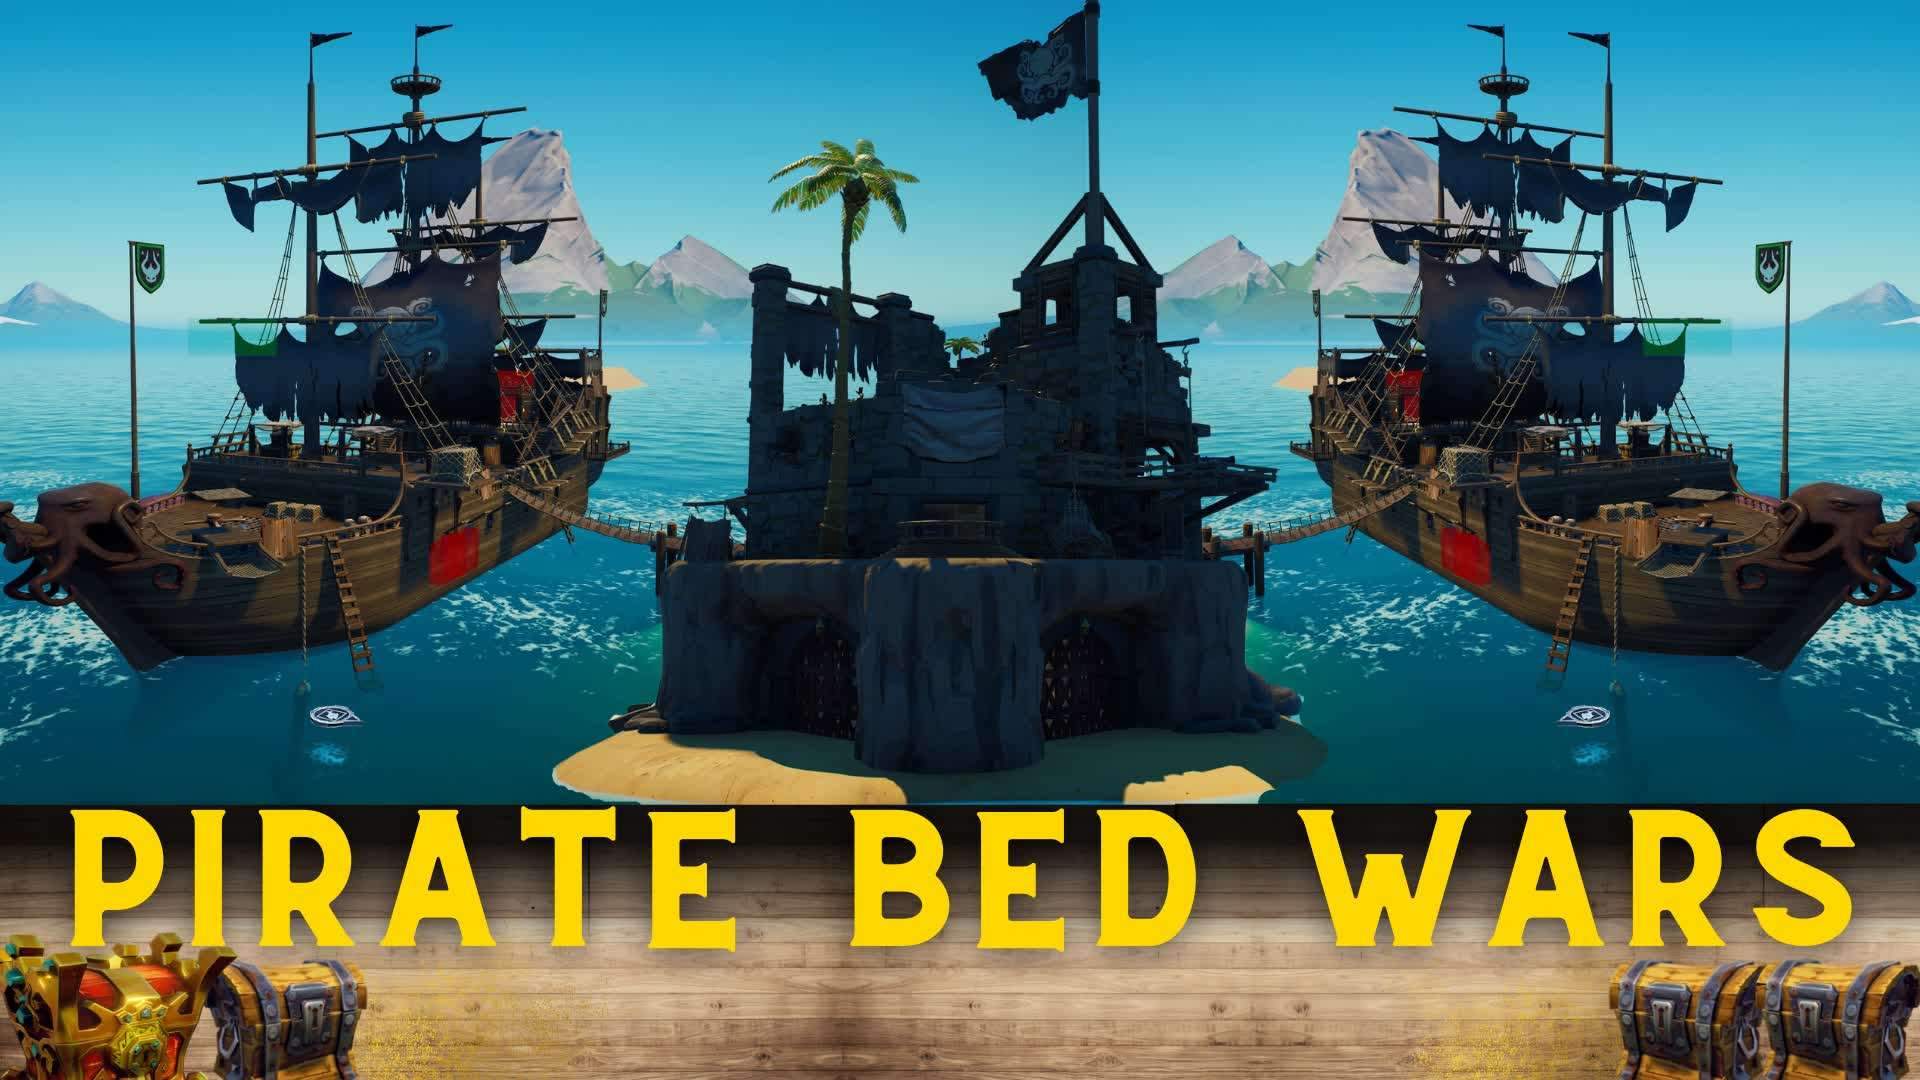 PIRATE BED WARS